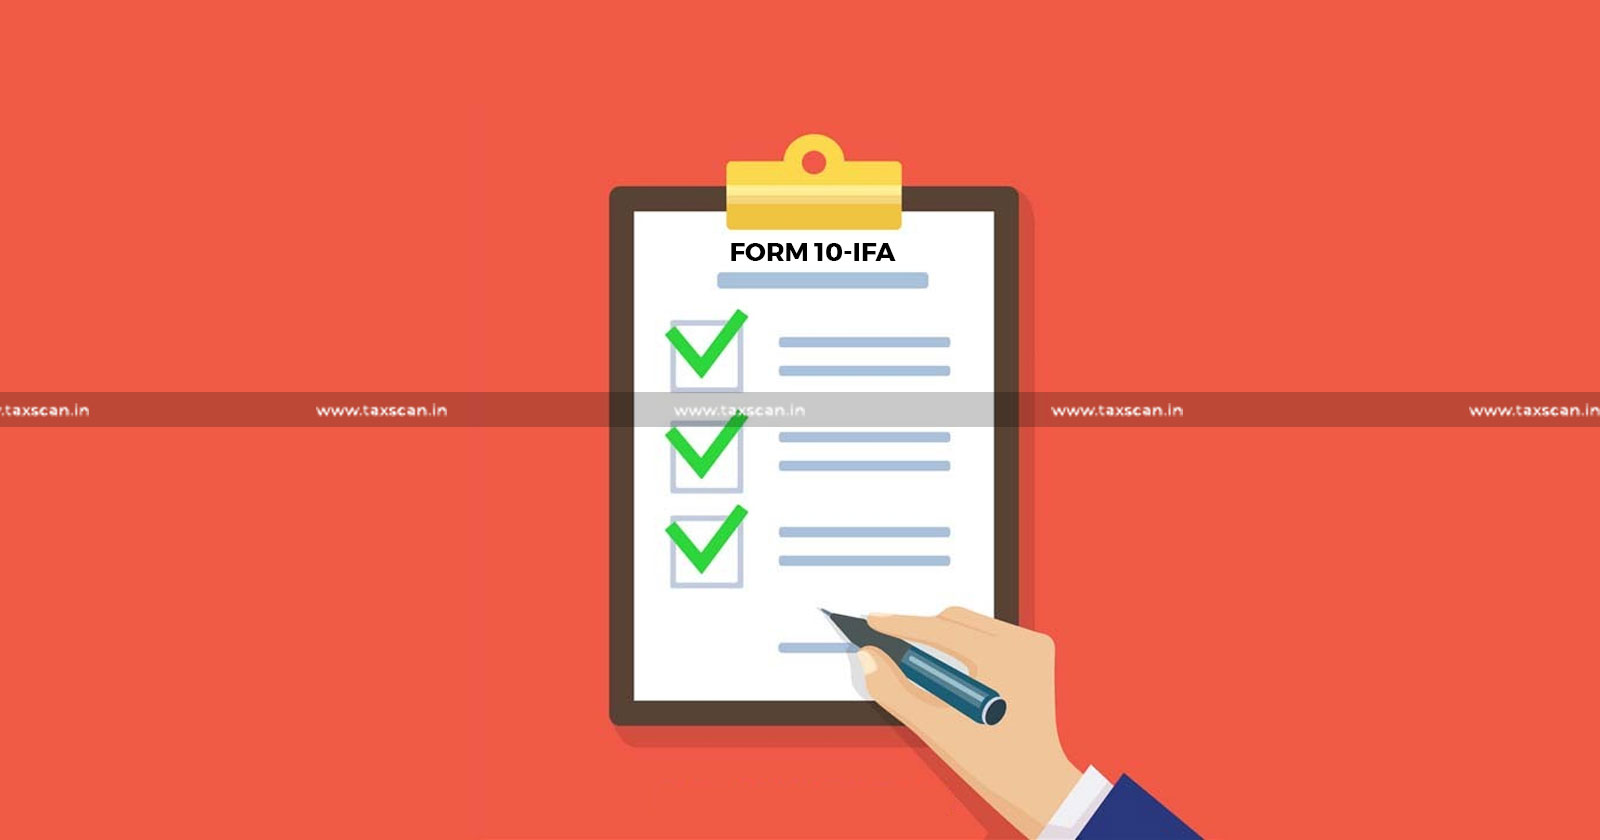 CBDT Introduces Form 10-IFA for Co-operative Societies - Form 10-IFA - CBDT Introduces Form 10-IFA - Tax Regime - Income Tax Act - 21AHA - taxscan